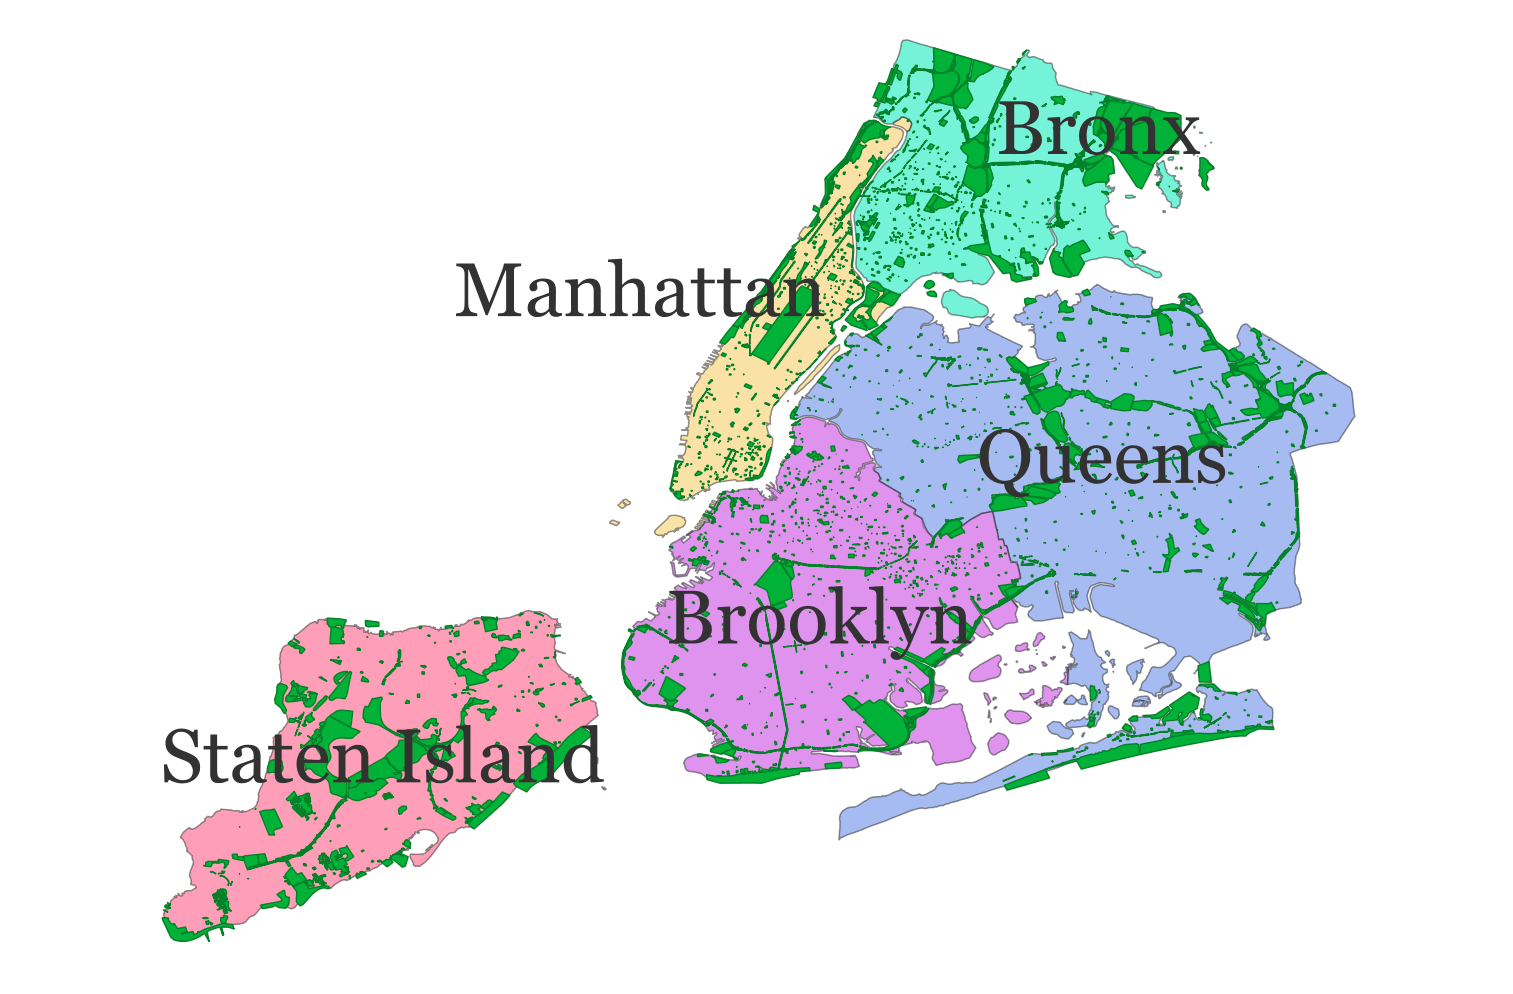 The five boroughs of New York City